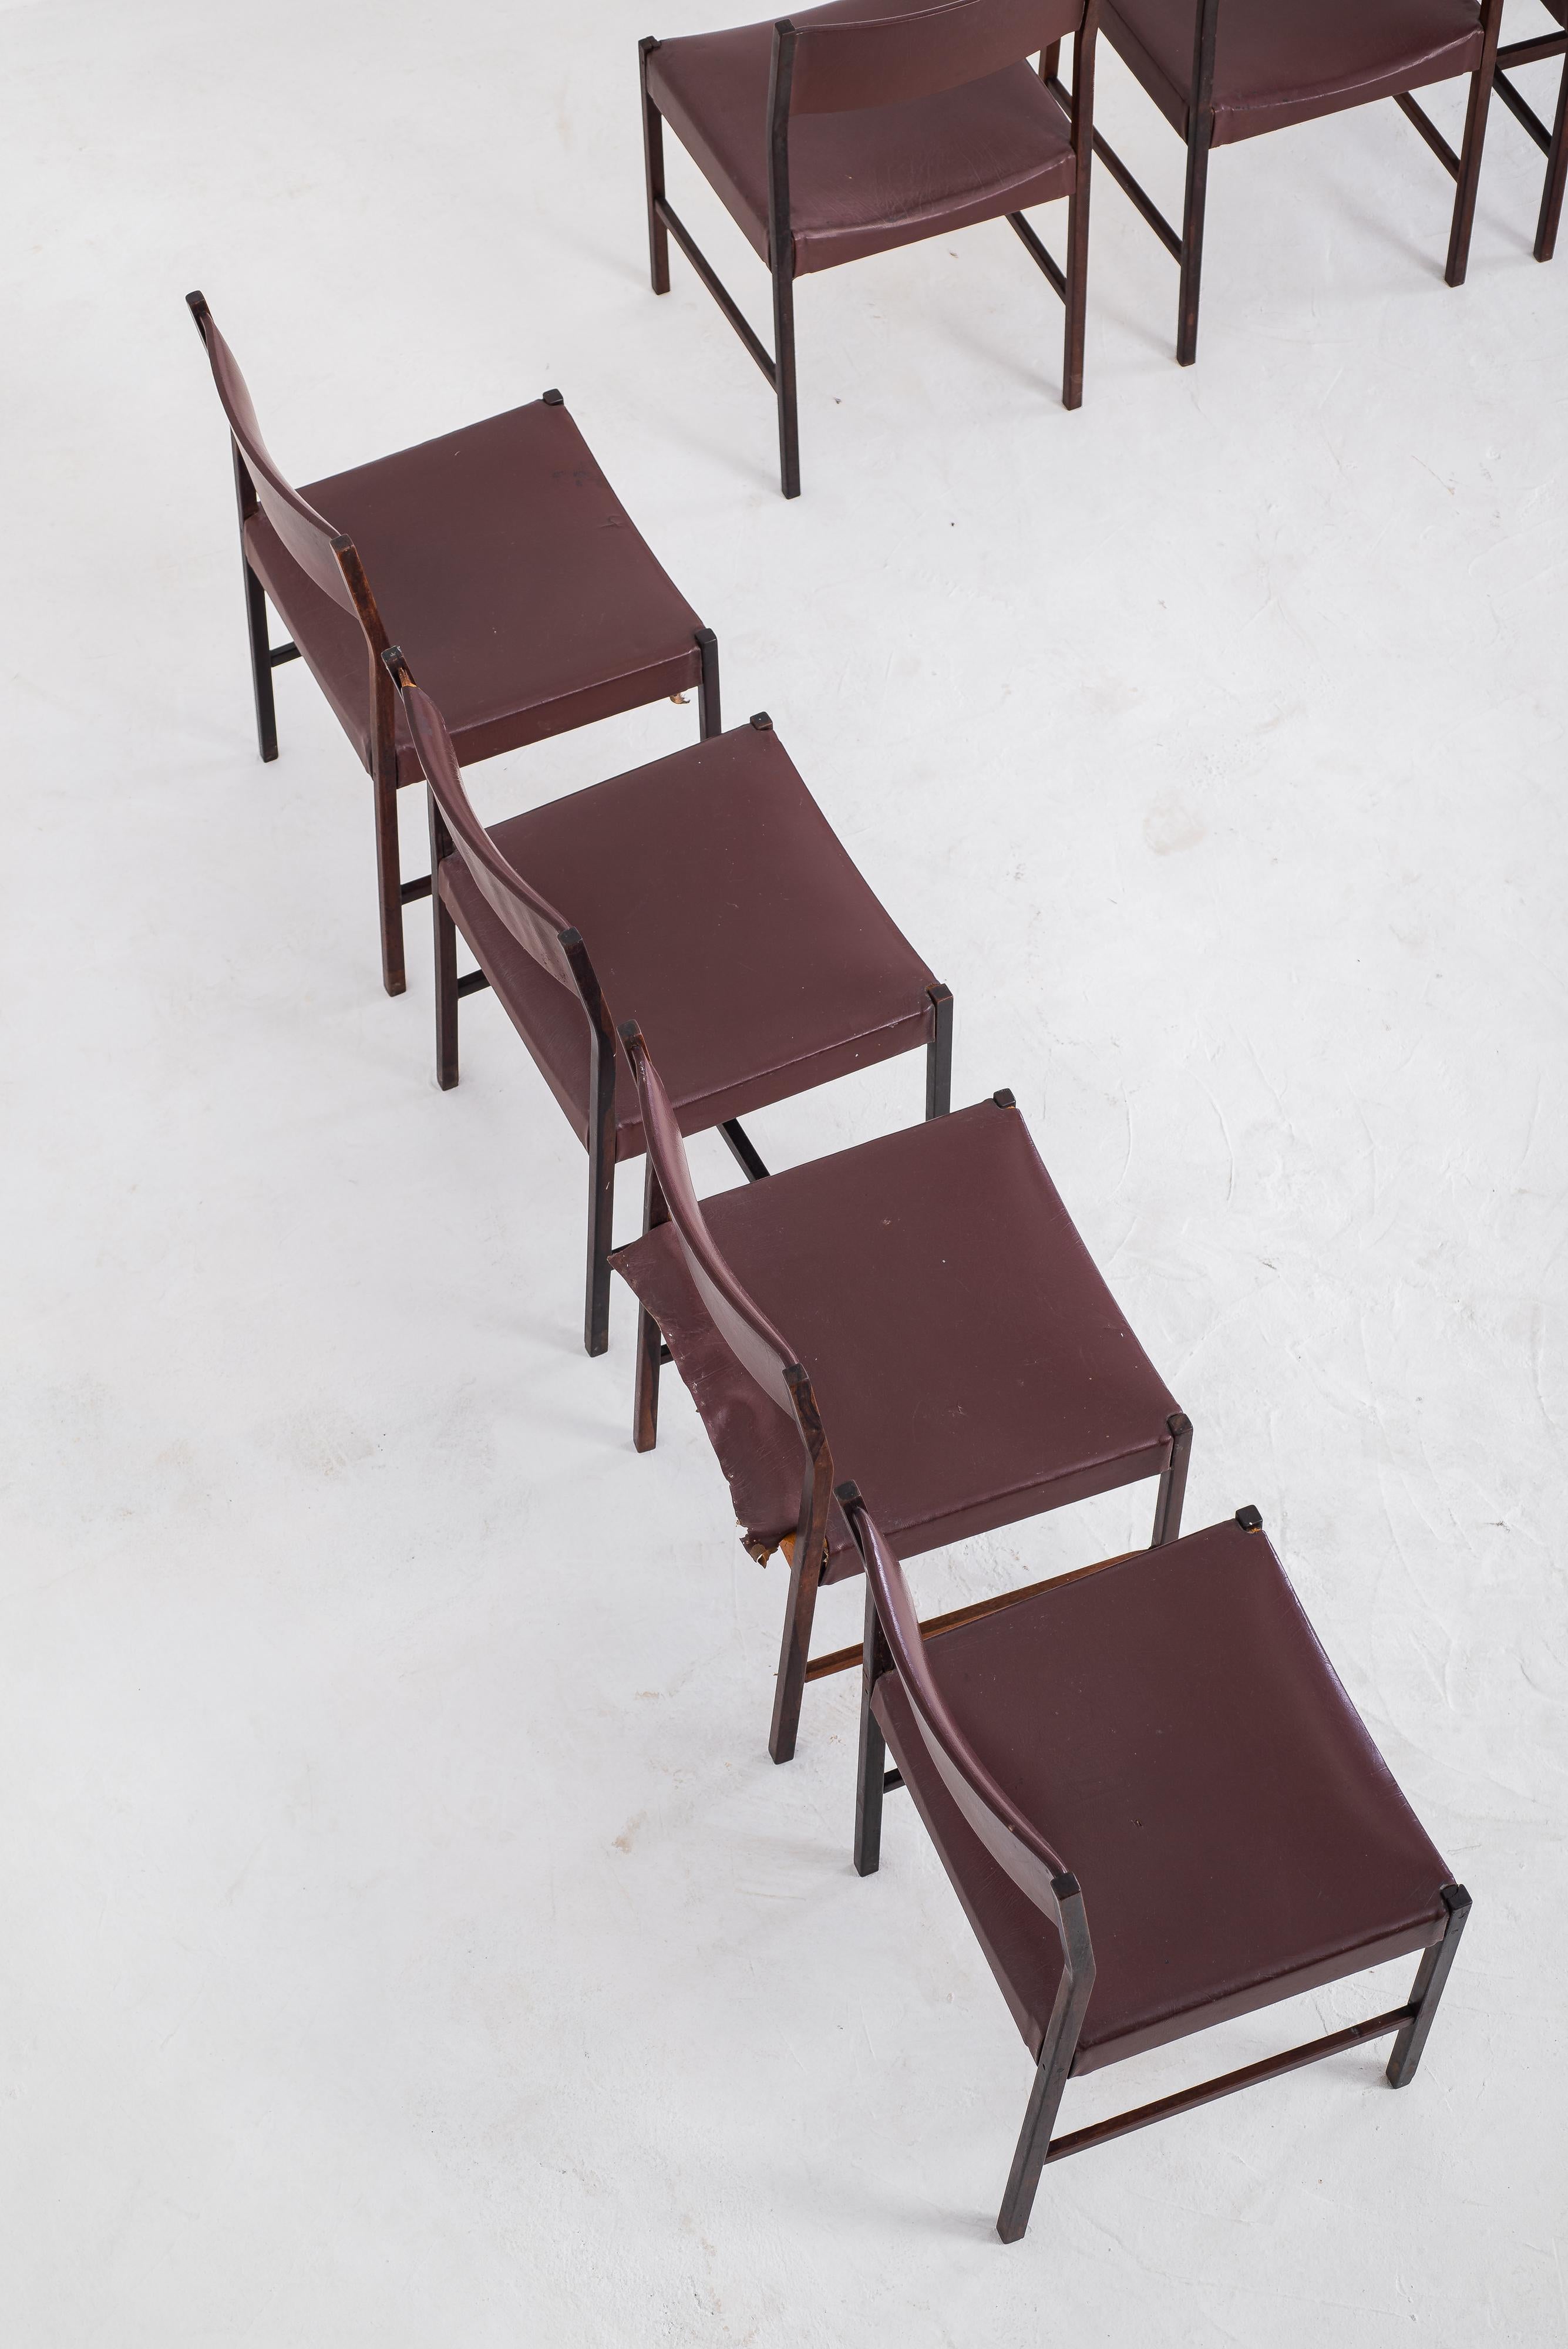 Set of 7 Itamaraty Dining Chairs in Original Condition By Jorge Zalszupin, 1959 In Good Condition For Sale In São Paulo, SP